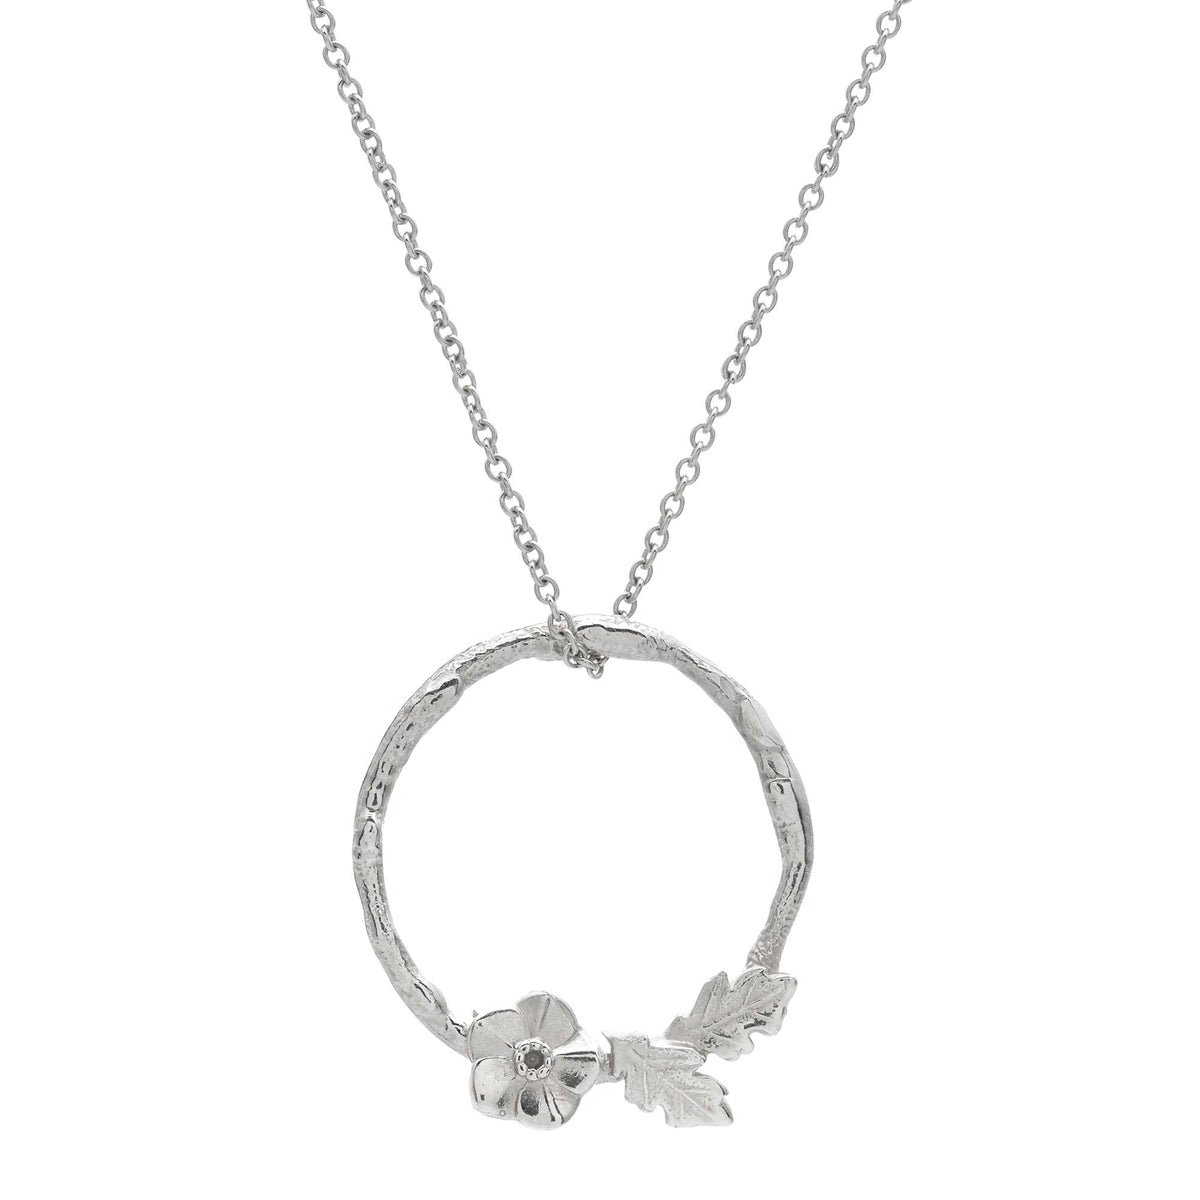 Forget me not wreath silver necklace flower pendant RHS Chelsea Flower Show